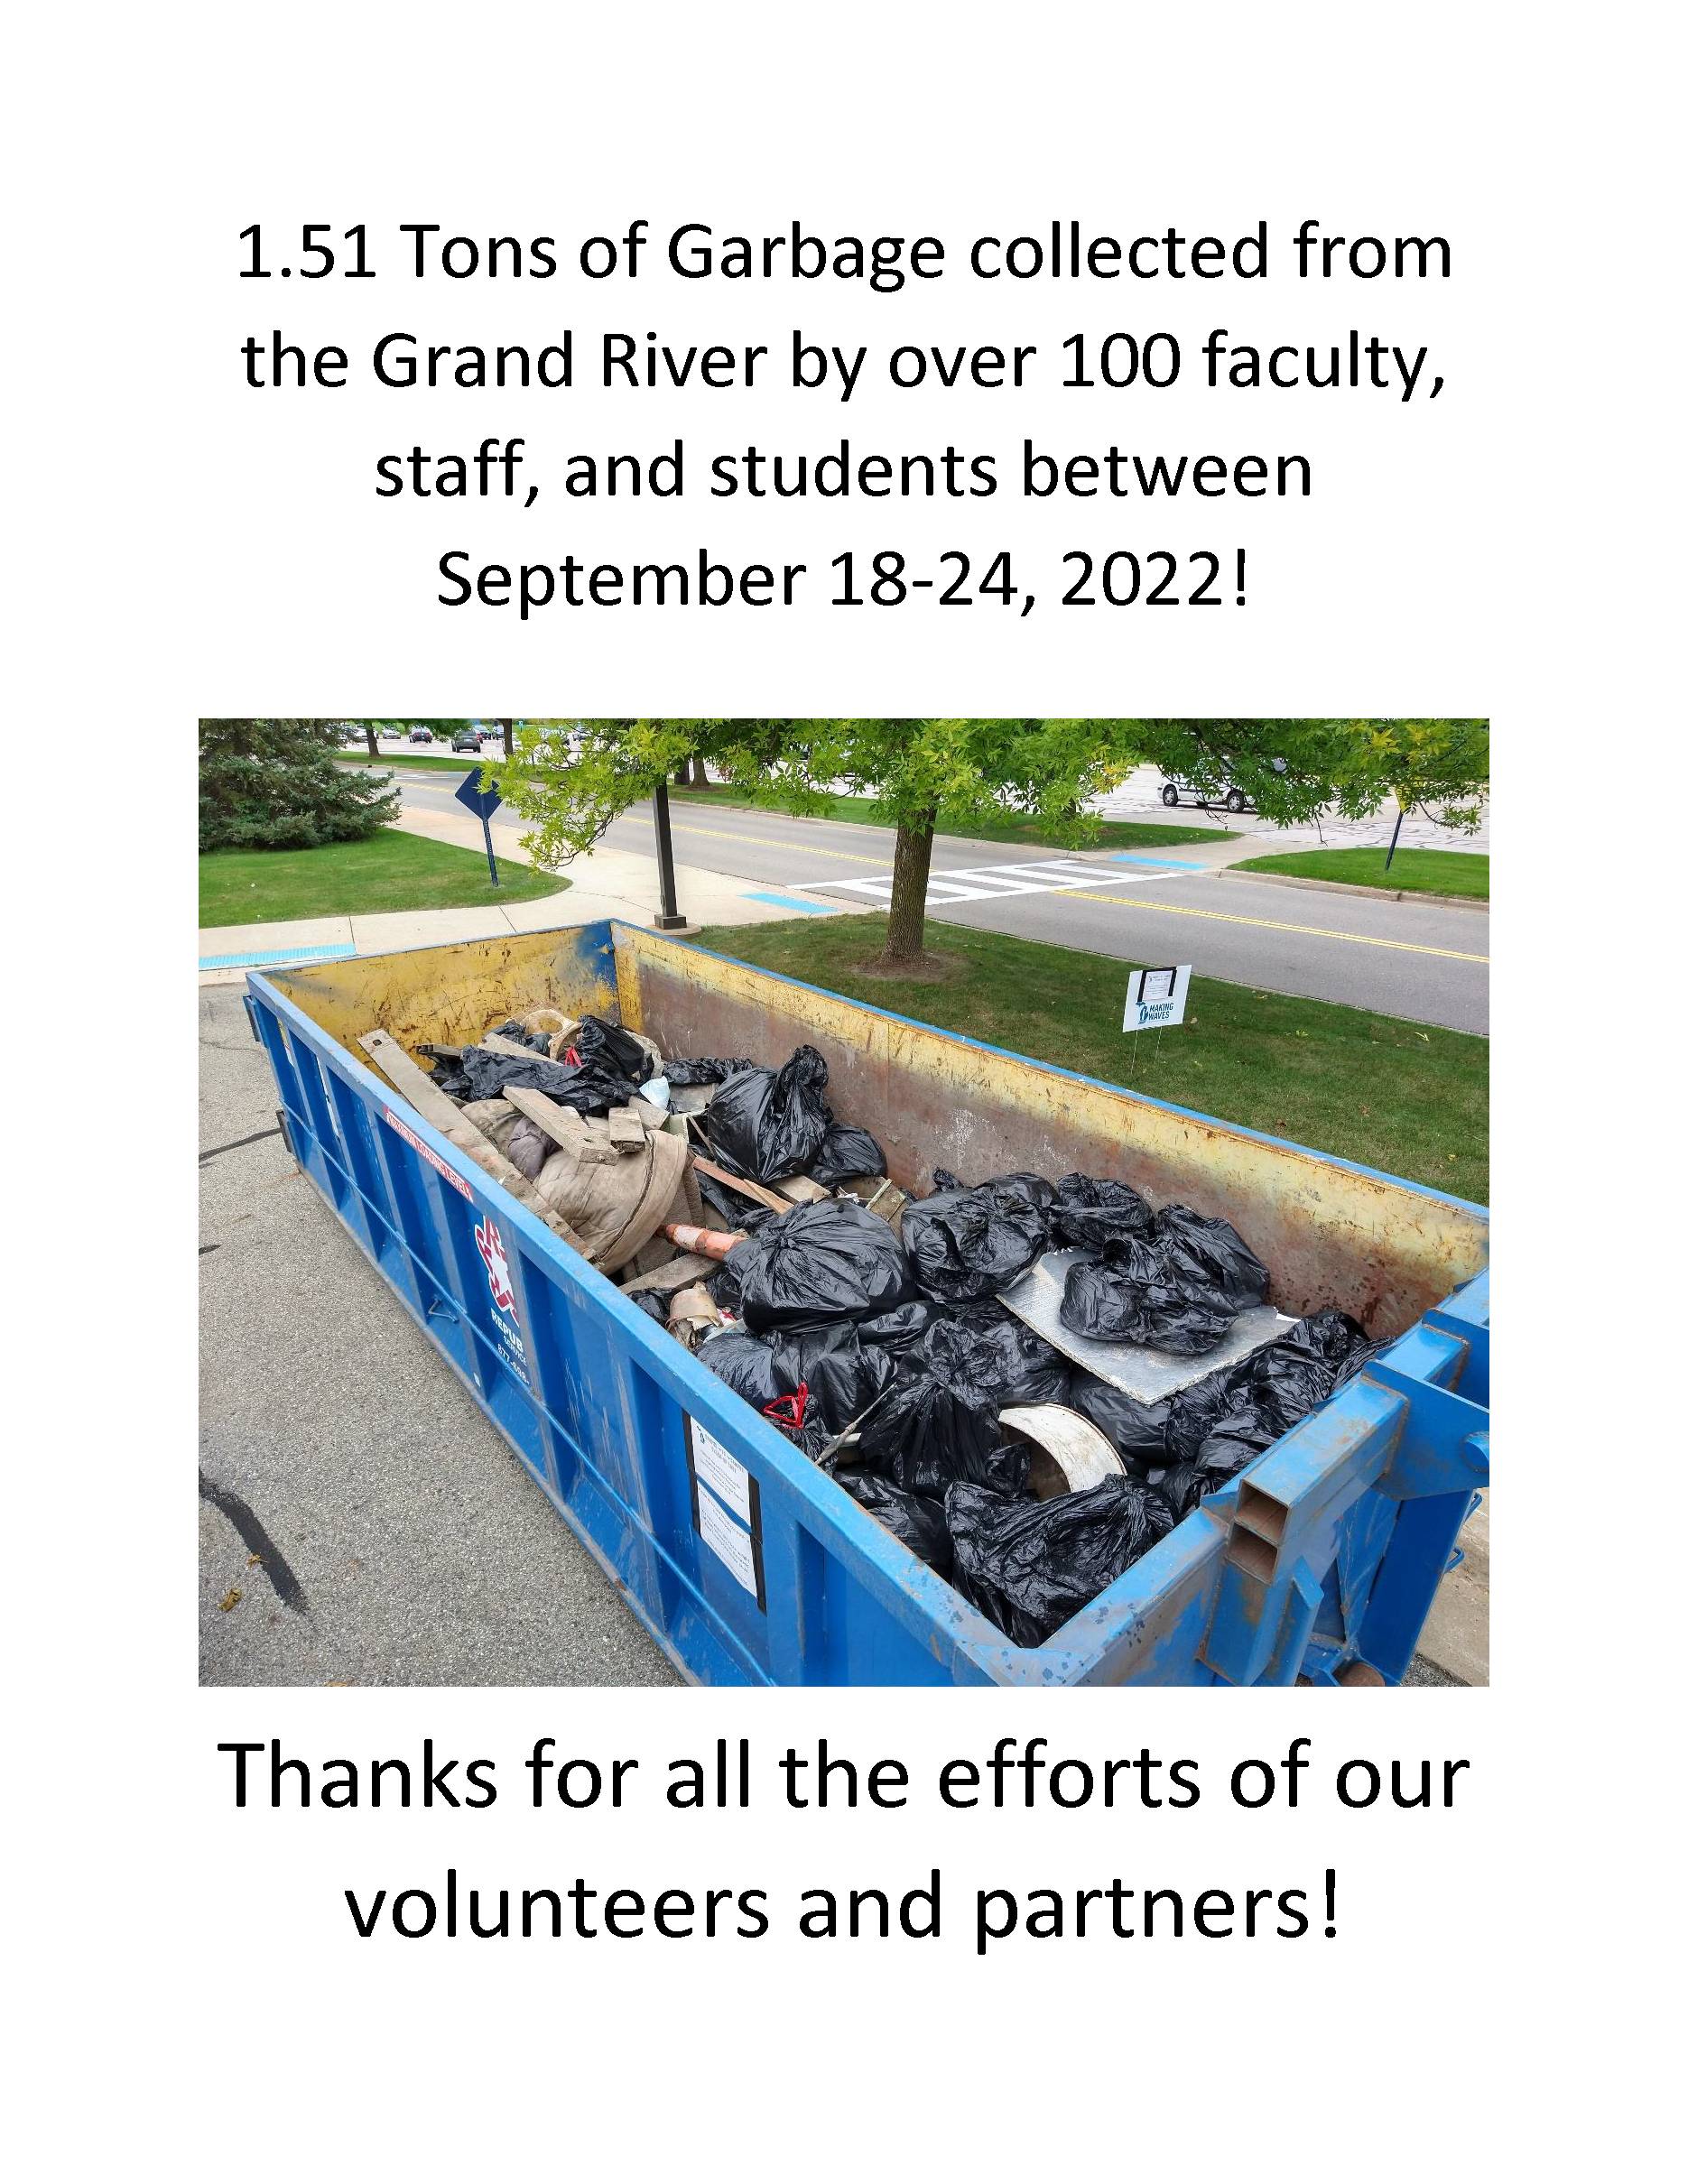 Campus Cleanup Results